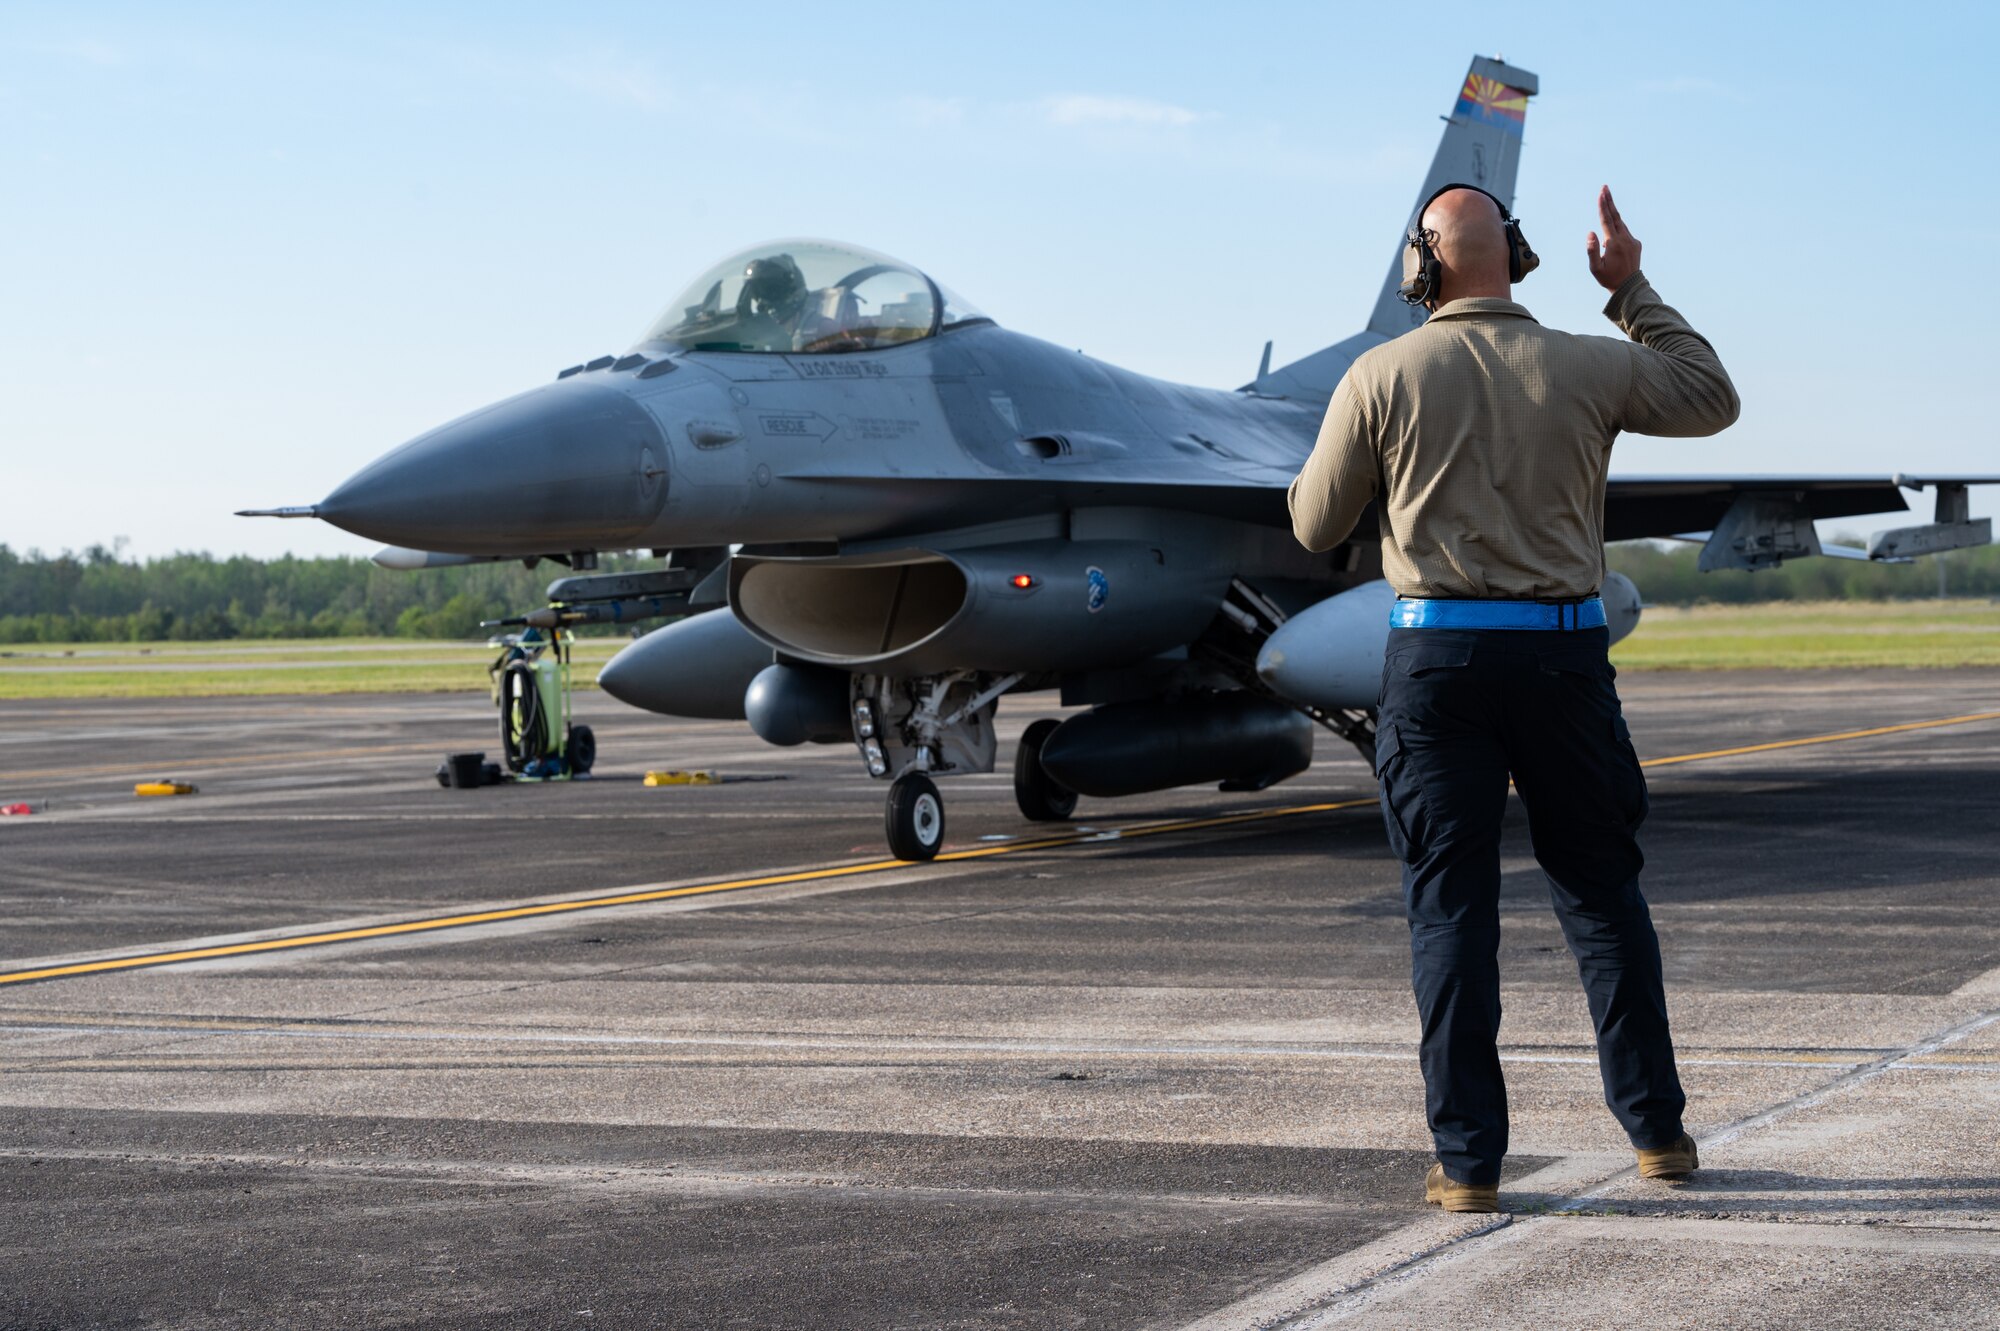 Staff Sgt. Austin Wall of the 162nd Wing, Arizona Air National Guard, launches an F-16 fighter aircraft at Naval Air Station Joint Reserve Base New Orleans, November 4 as part of operation Southern Lightning Strike. The Air National Guard led exercise allows units to deploy from their home bases to forward operating bases with minimum personnel and equipment to accomplish the mission in austere conditions. (U.S. Air National Guard Photo by Technical Sgt. H. Edward Stramler)